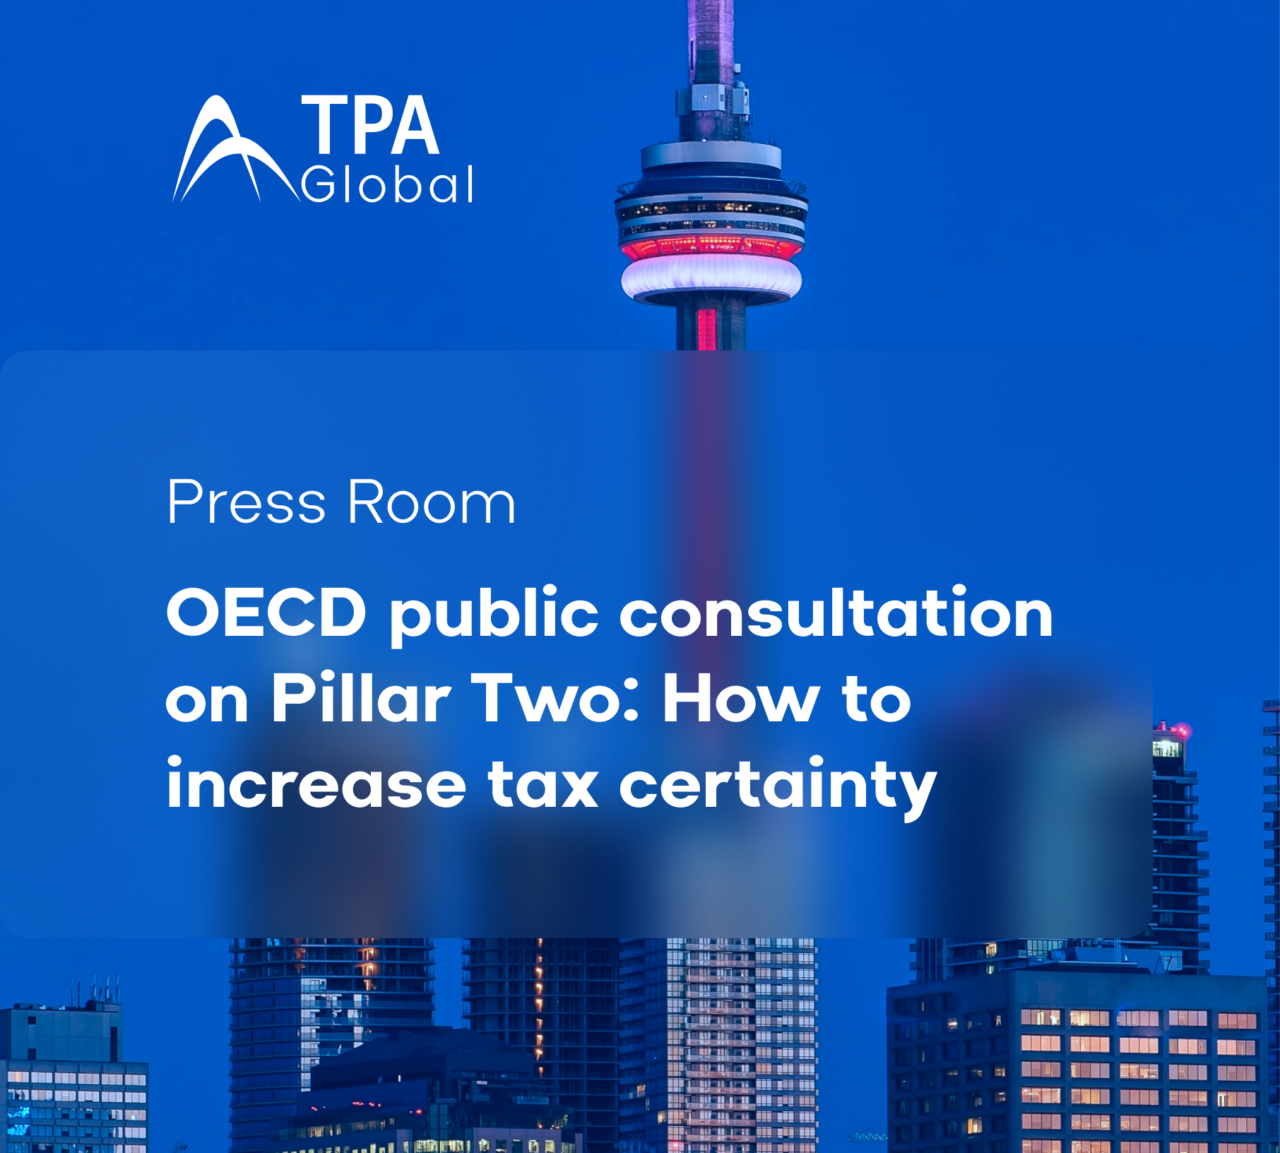 OECD public consultation on Pillar Two: How to increase tax certainty